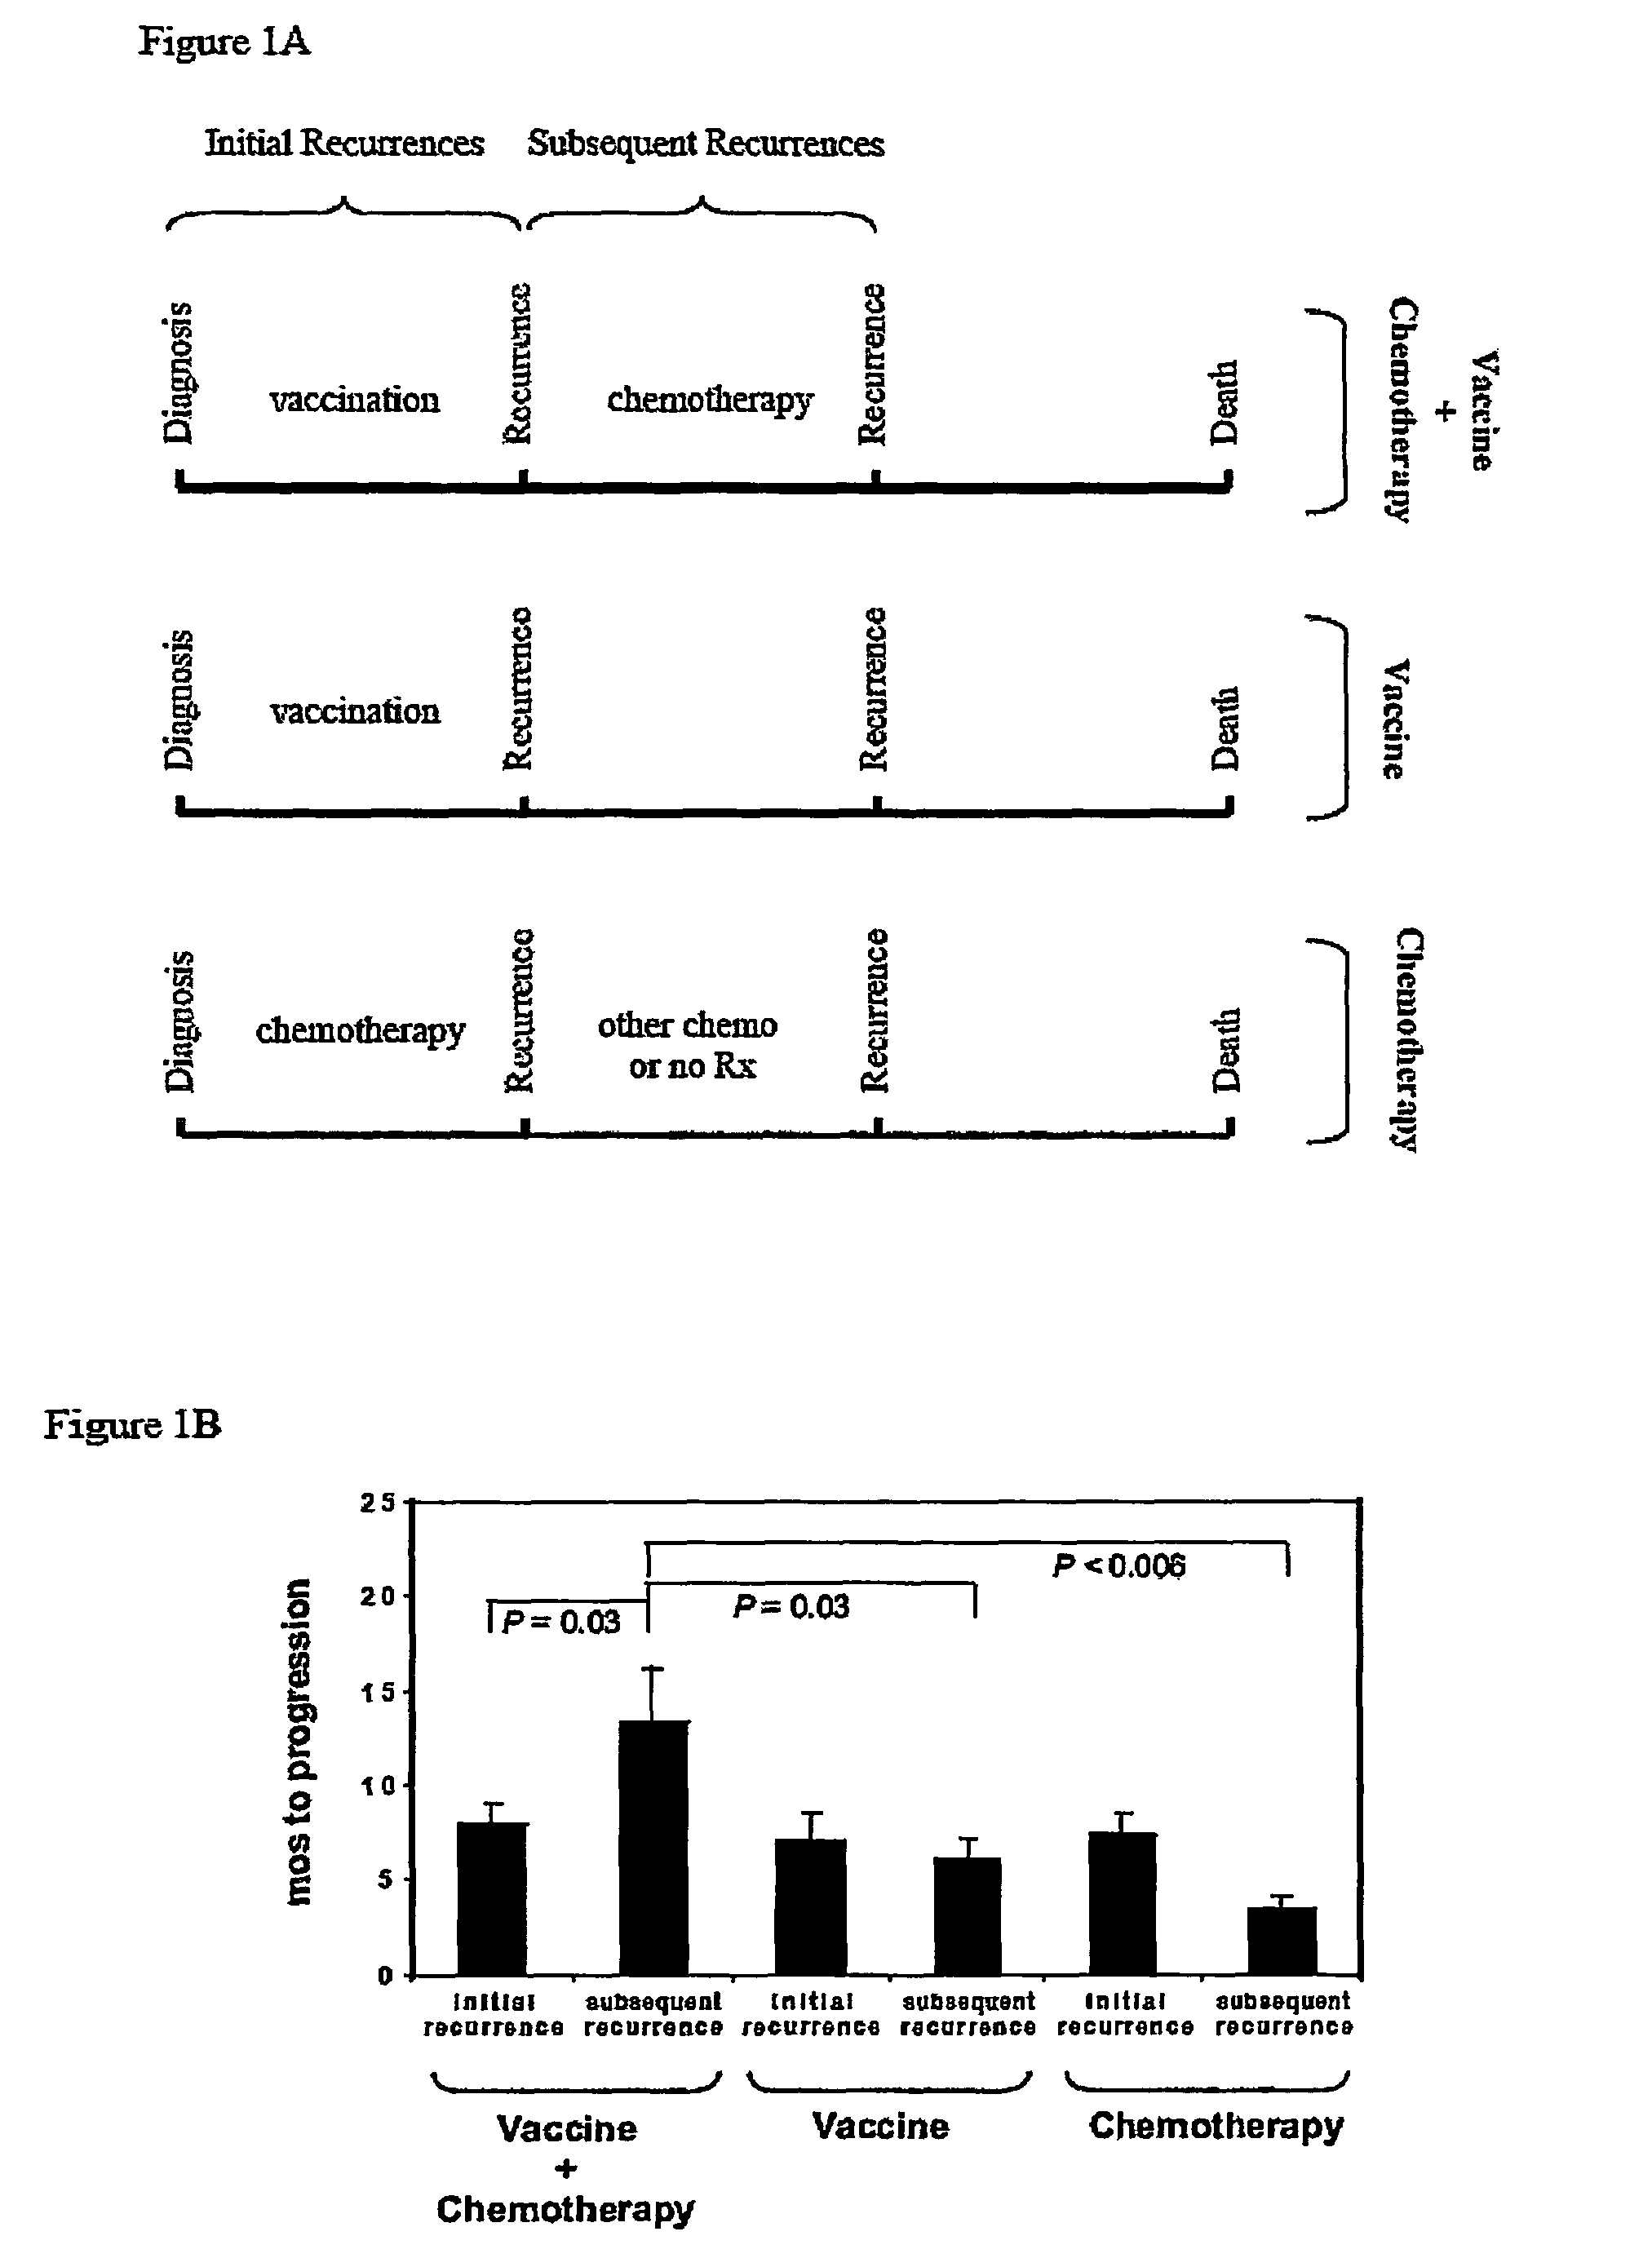 System and method for the treatment of cancer, including cancers of the central nervous system